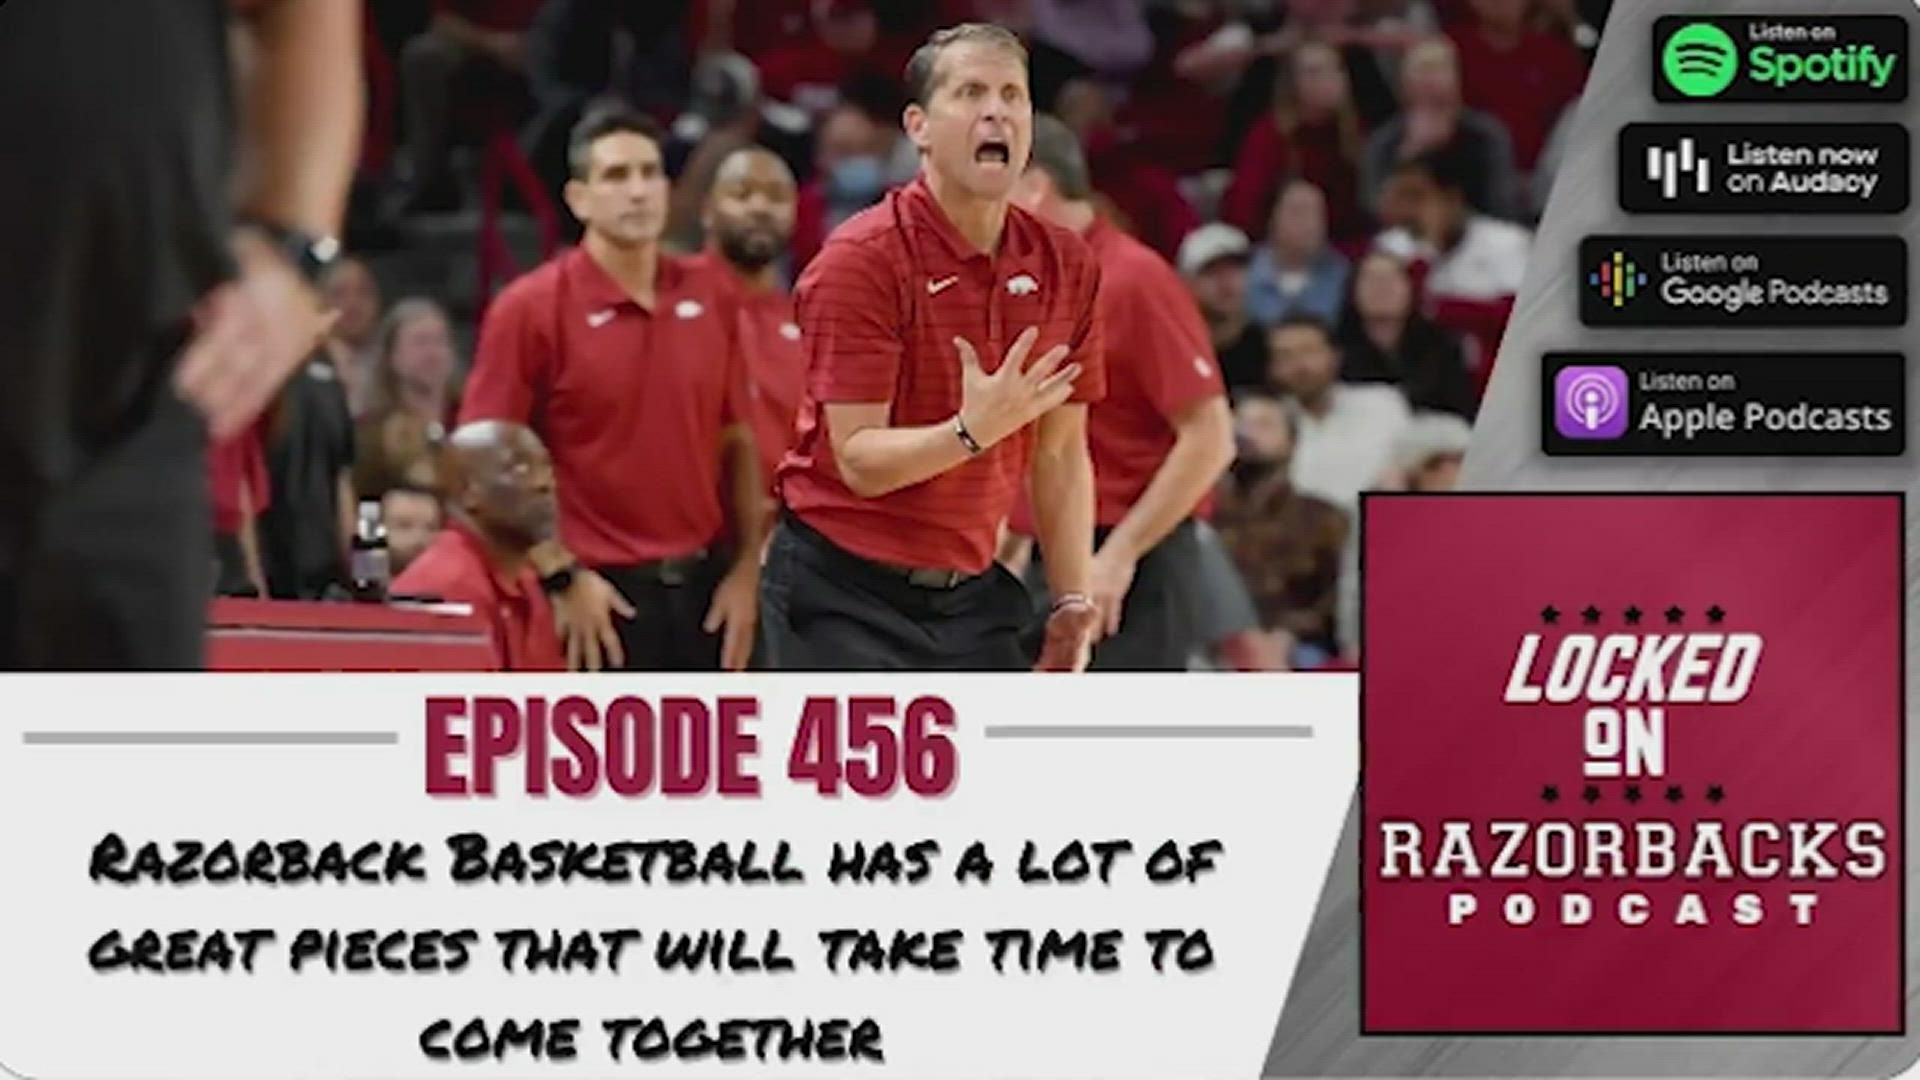 Razorback Basketball has lots of great pieces that will take time to come together and let's move Arkansas & LSU back to Black Friday. All that & more on episode 456